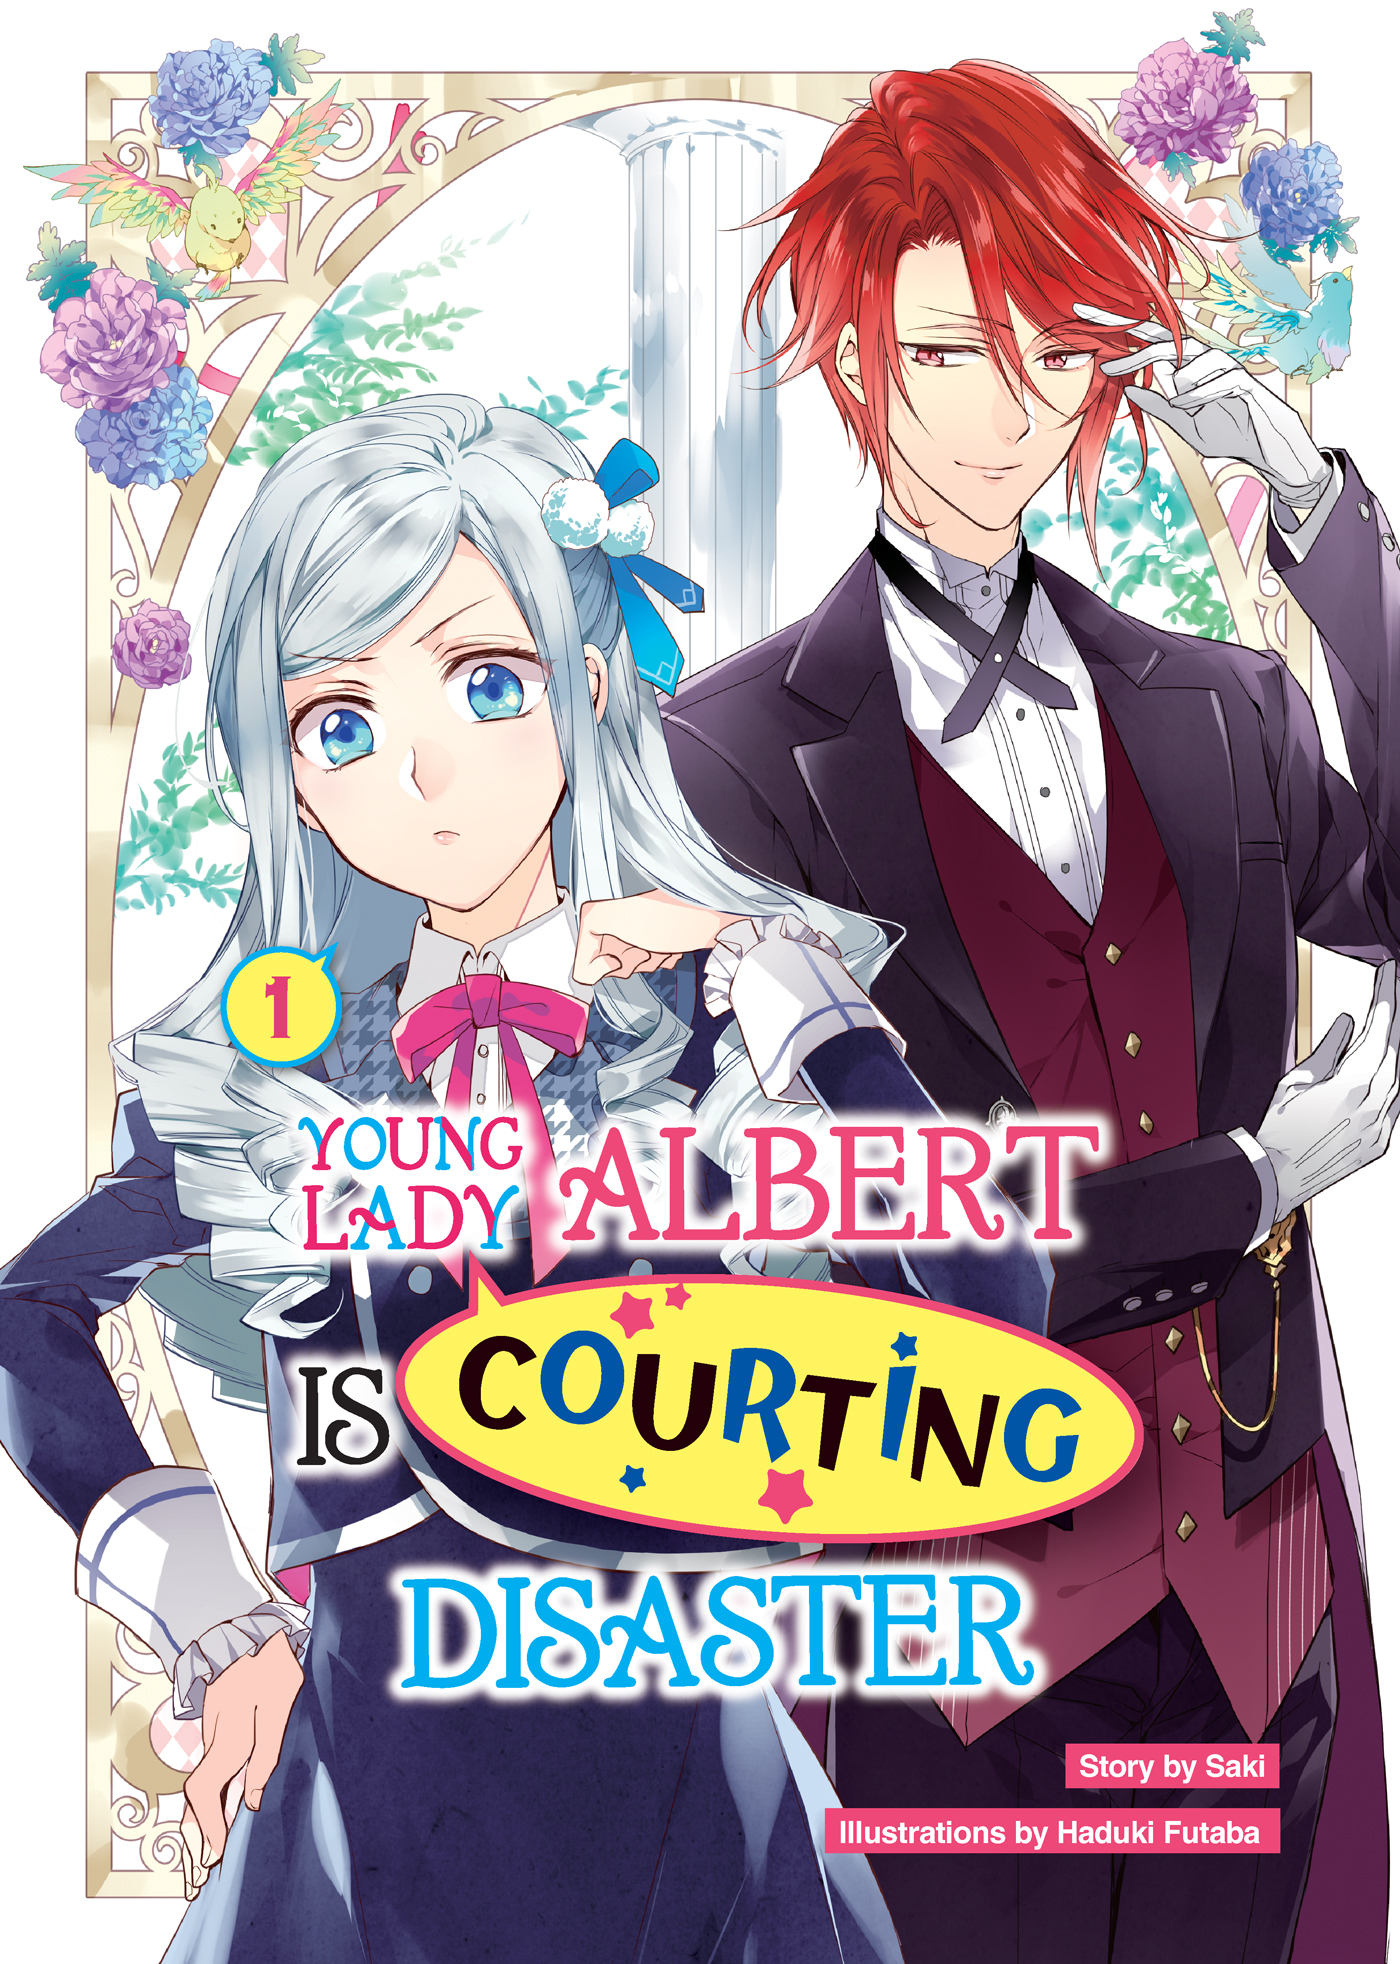 Young Lady Albert Is Courting Disaster! Vol. 1 LN Cover